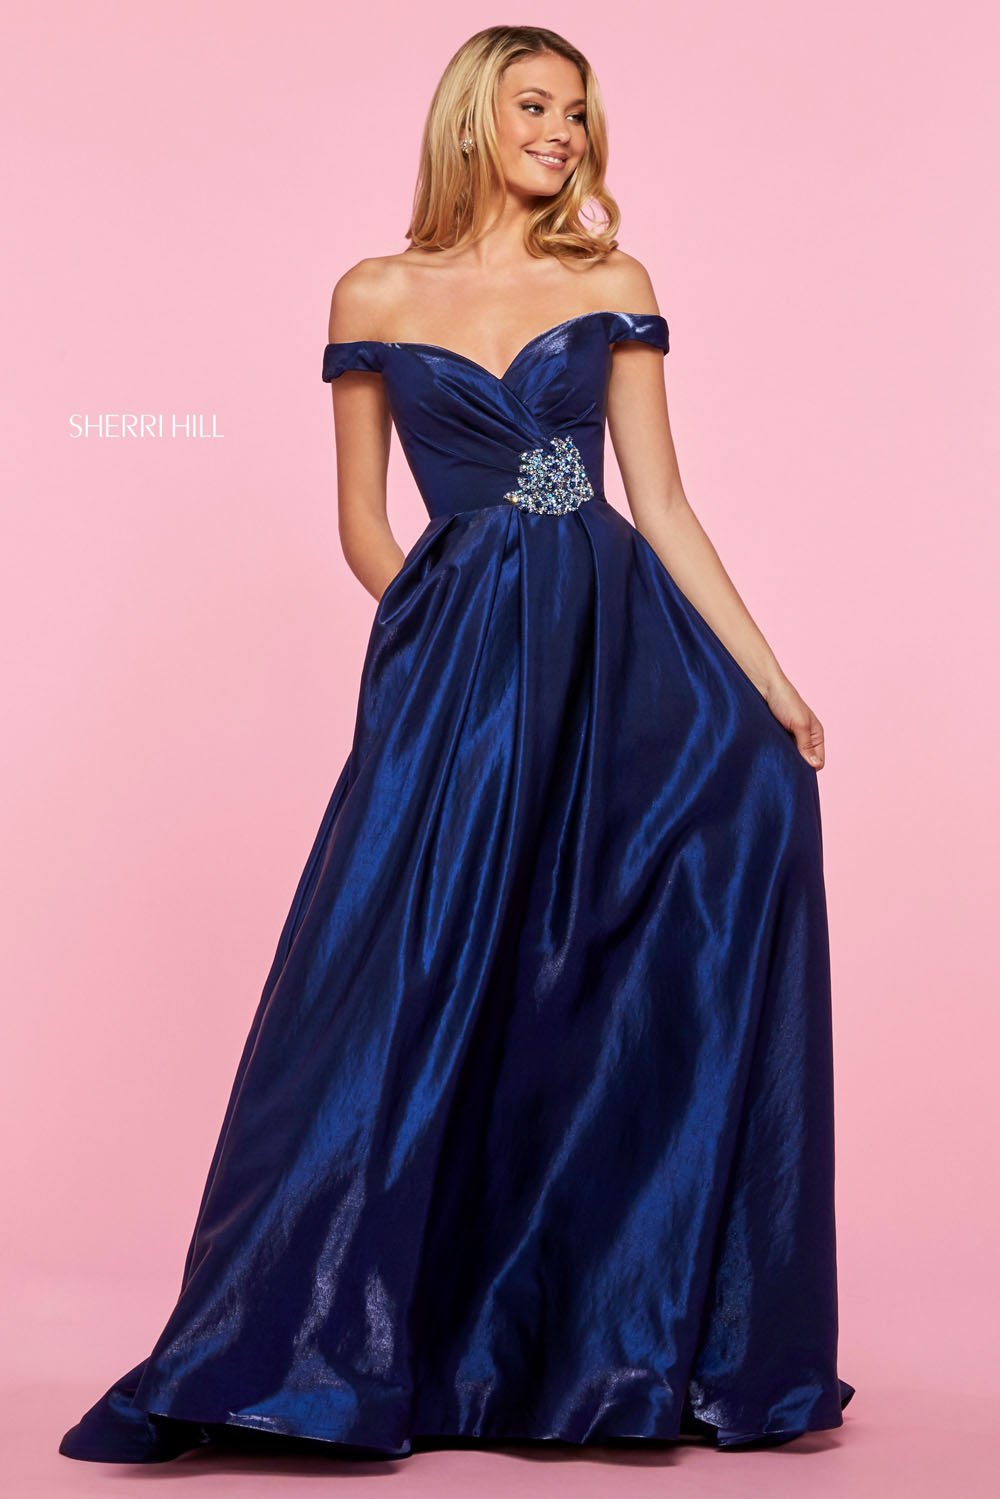 Sherri Hill 53309 dress images in these colors: Red, Aqua, Hot Pink, Purple, Coral, Teal, Navy.